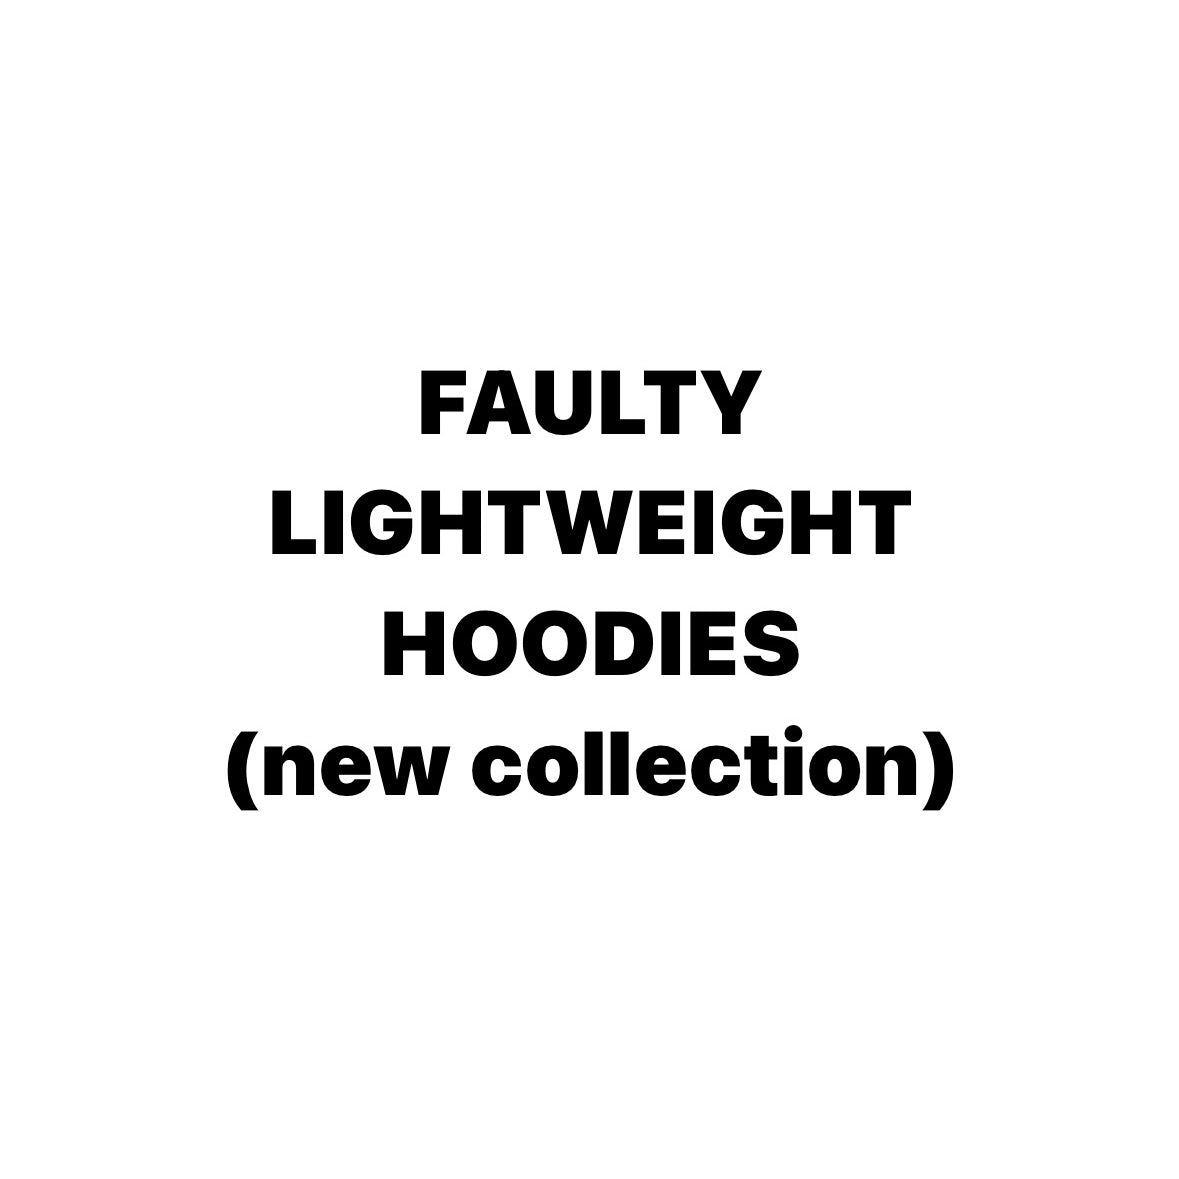 FAULTY - LIGHTWEIGHT HOODIES (NEW COLLECTION)